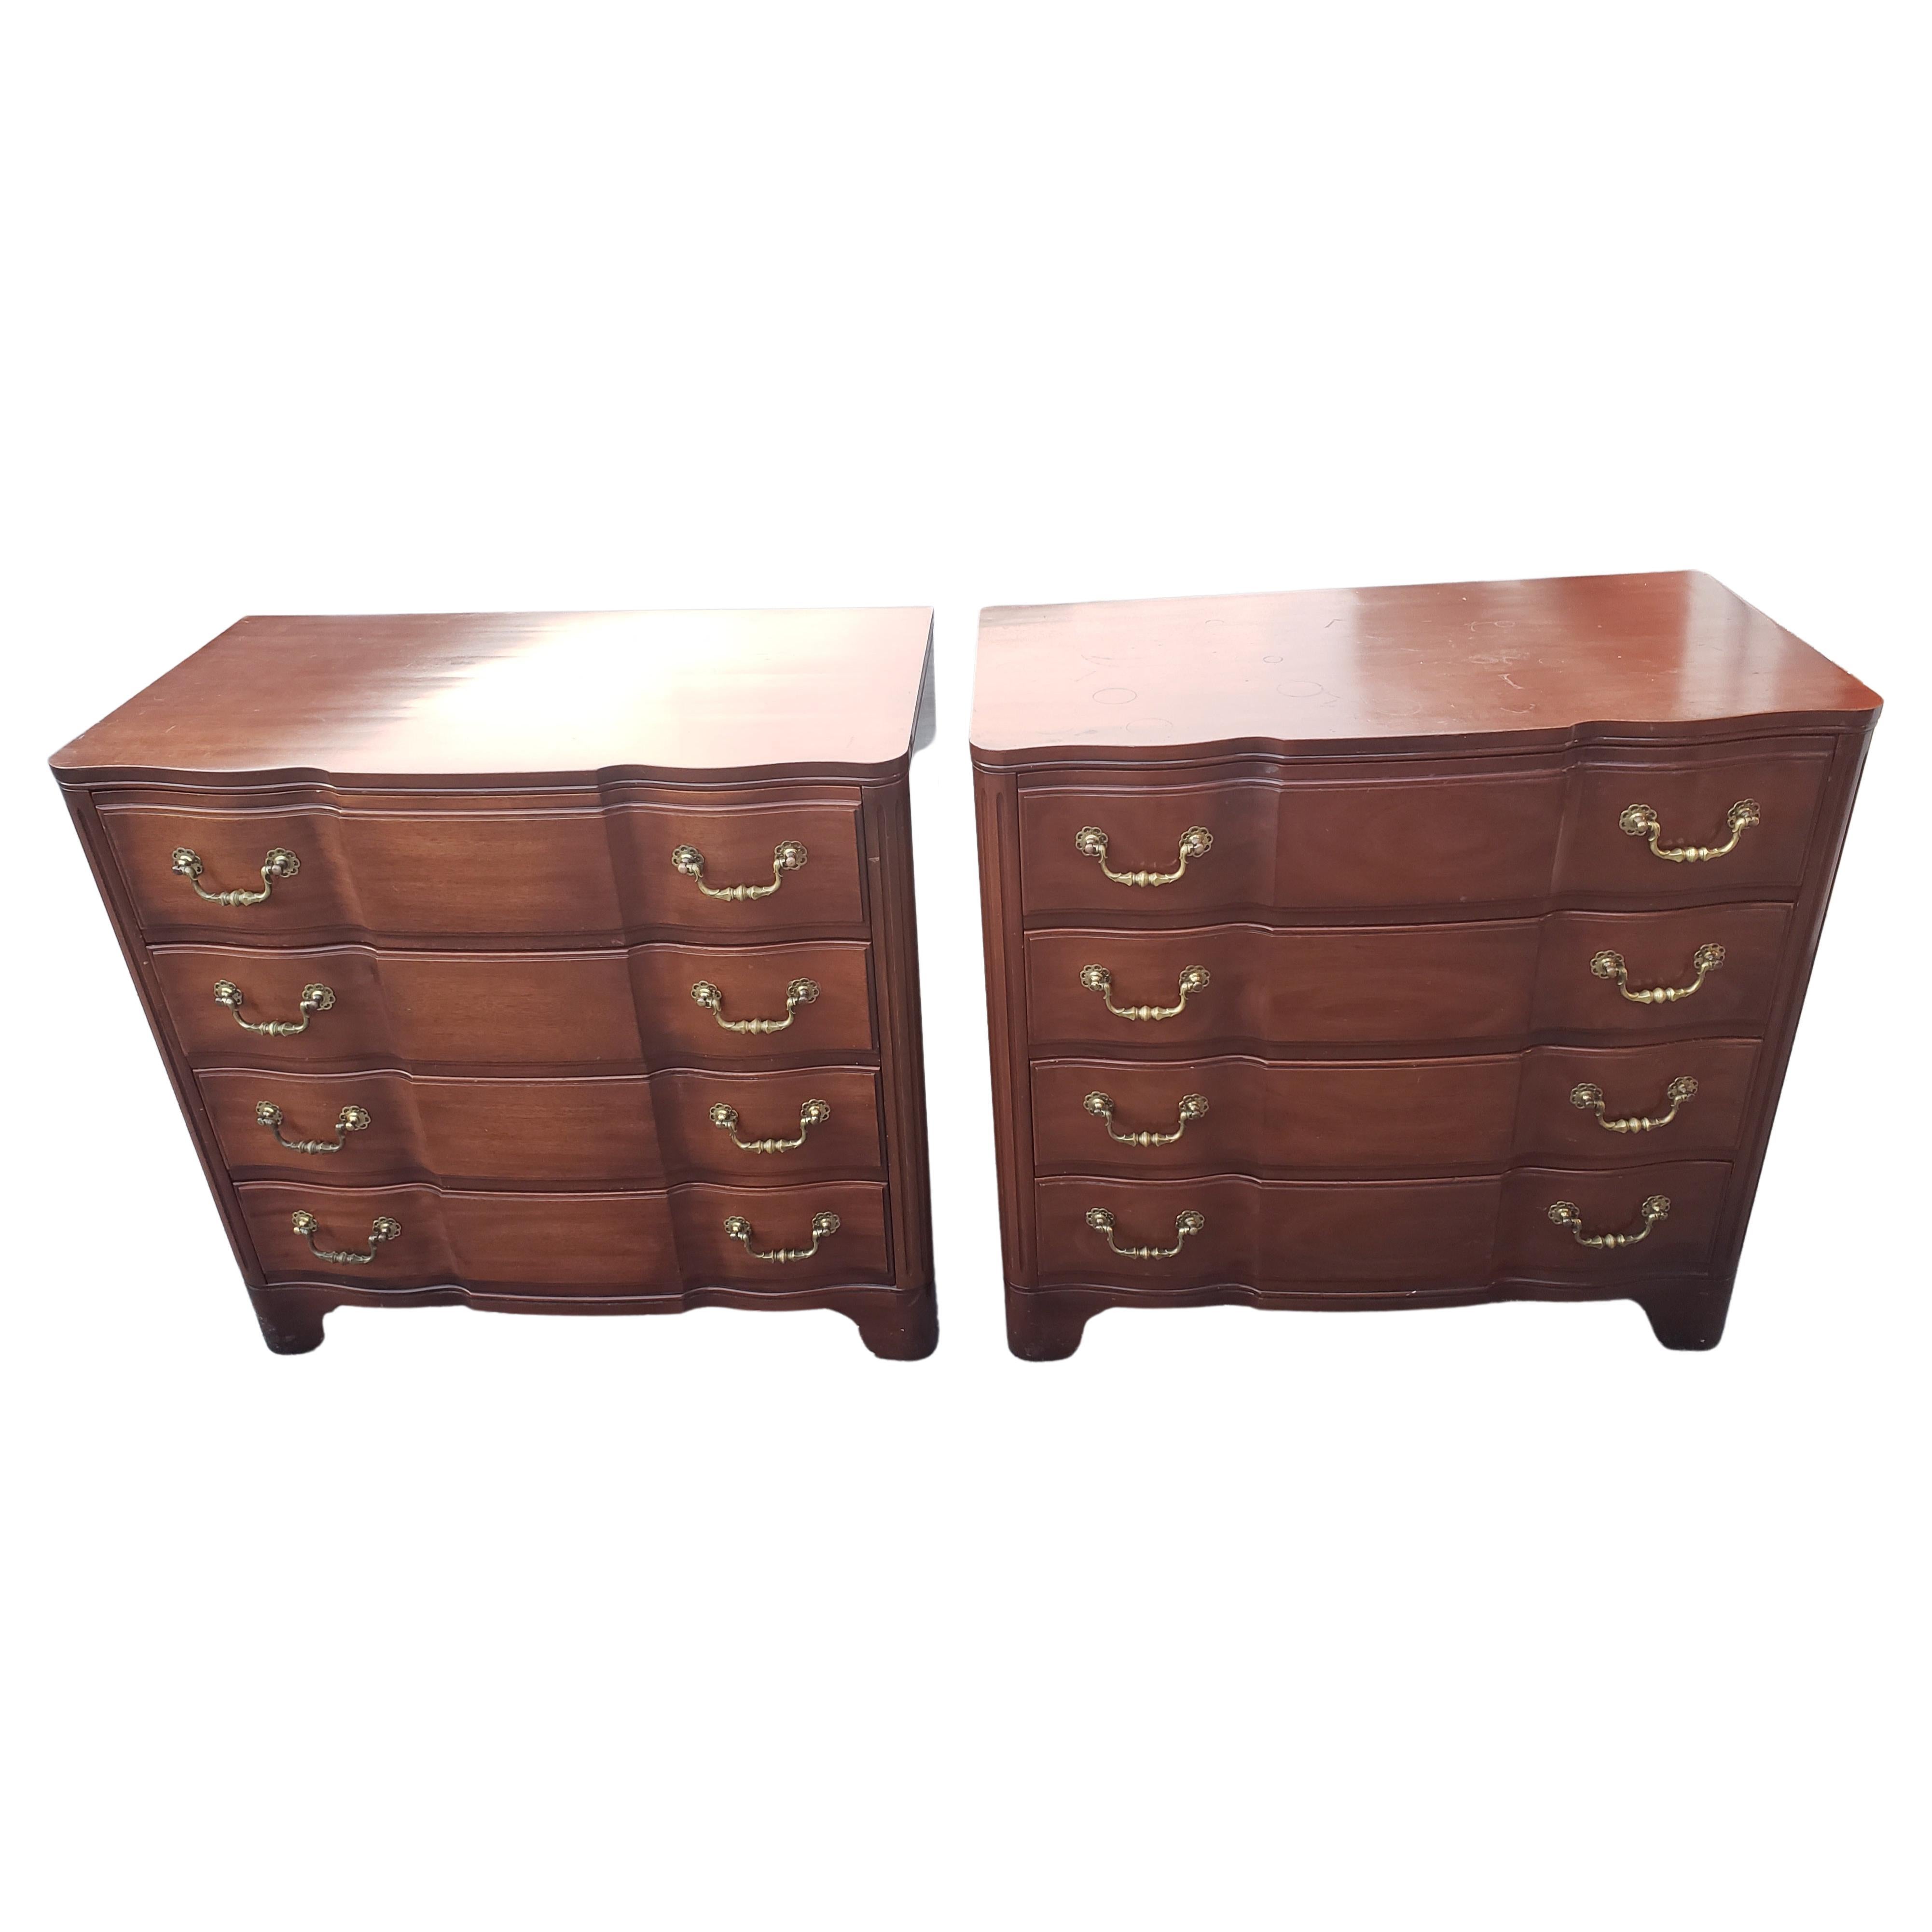 Chippendale John Widdicomb Oxford Finish Mahogany Block Front Bachelor Chests, a Pair